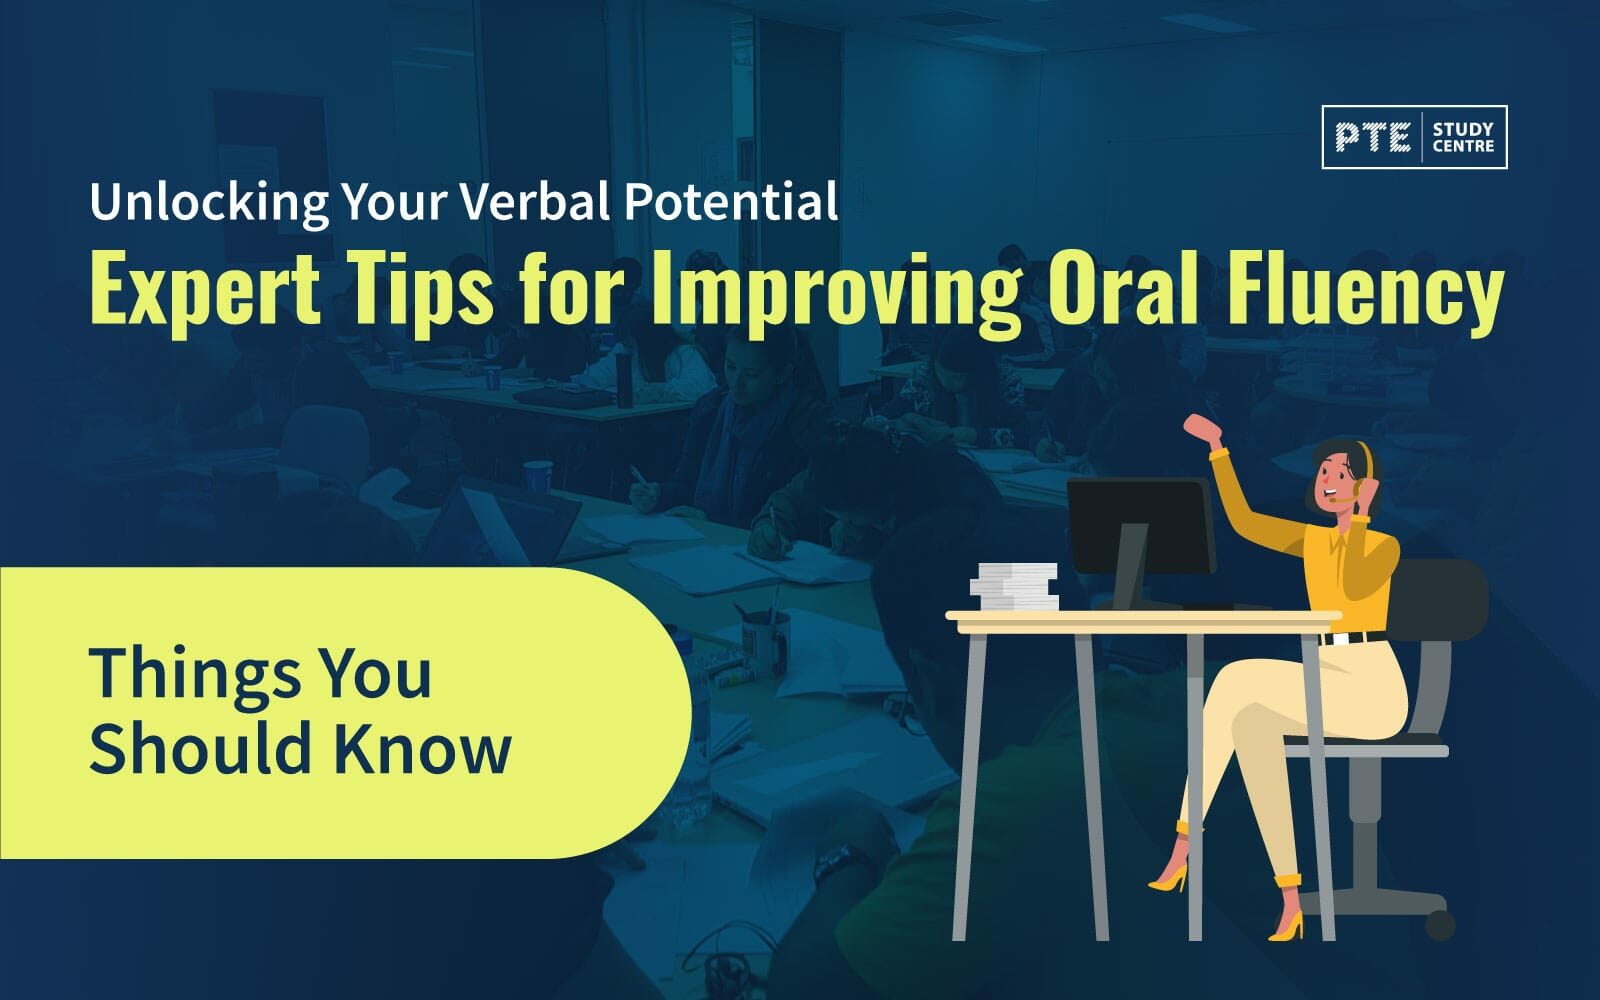 Unlocking Your Verbal Potential: Expert Tips for Improving Oral Fluency